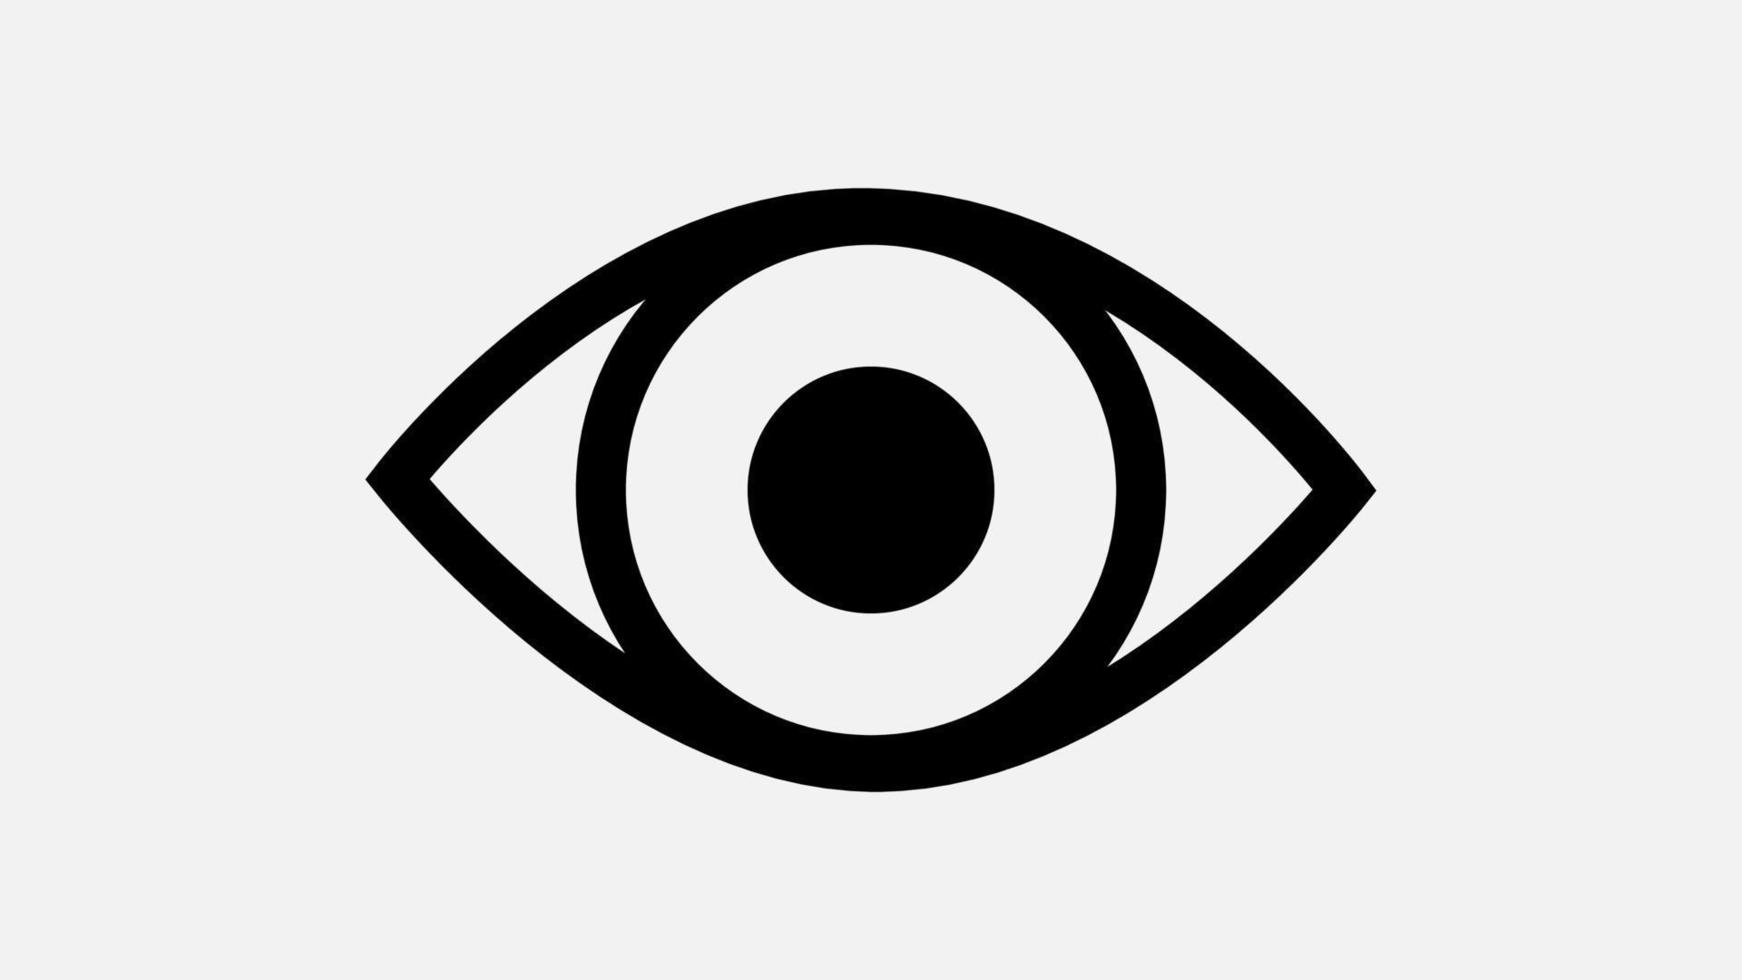 Vector eye icon in black and white color illustration